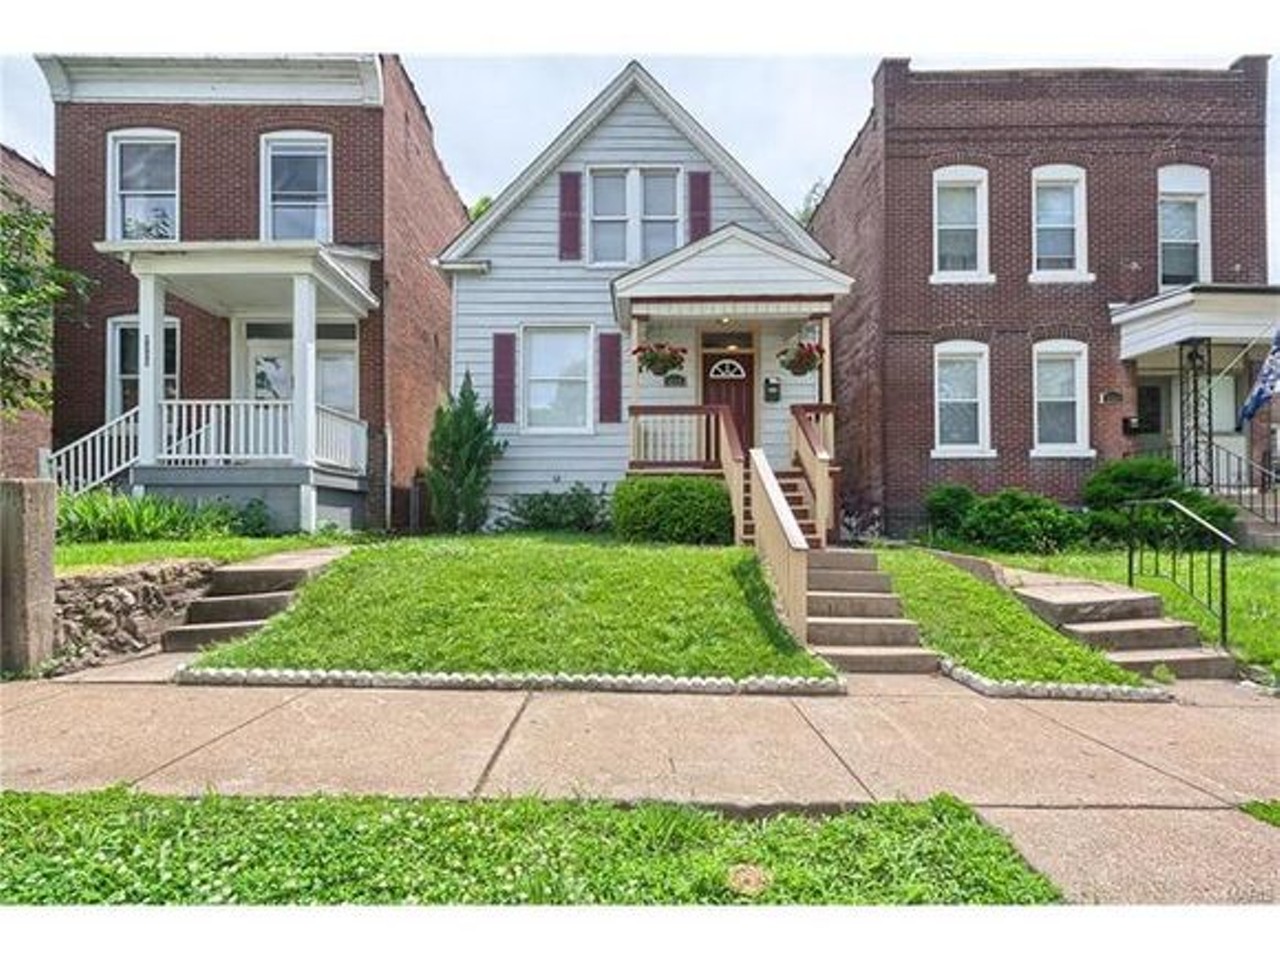 4322 Connecticut
St. Louis, MO 63116
$149,900
2 beds / 2 baths / 3,049 lot sqft
8 minute walk to Tower Grove Park. Directions here.
This 1 1/2 story has been very well maintained -- and we have a feeling it won't have to wait too long for a buyer.